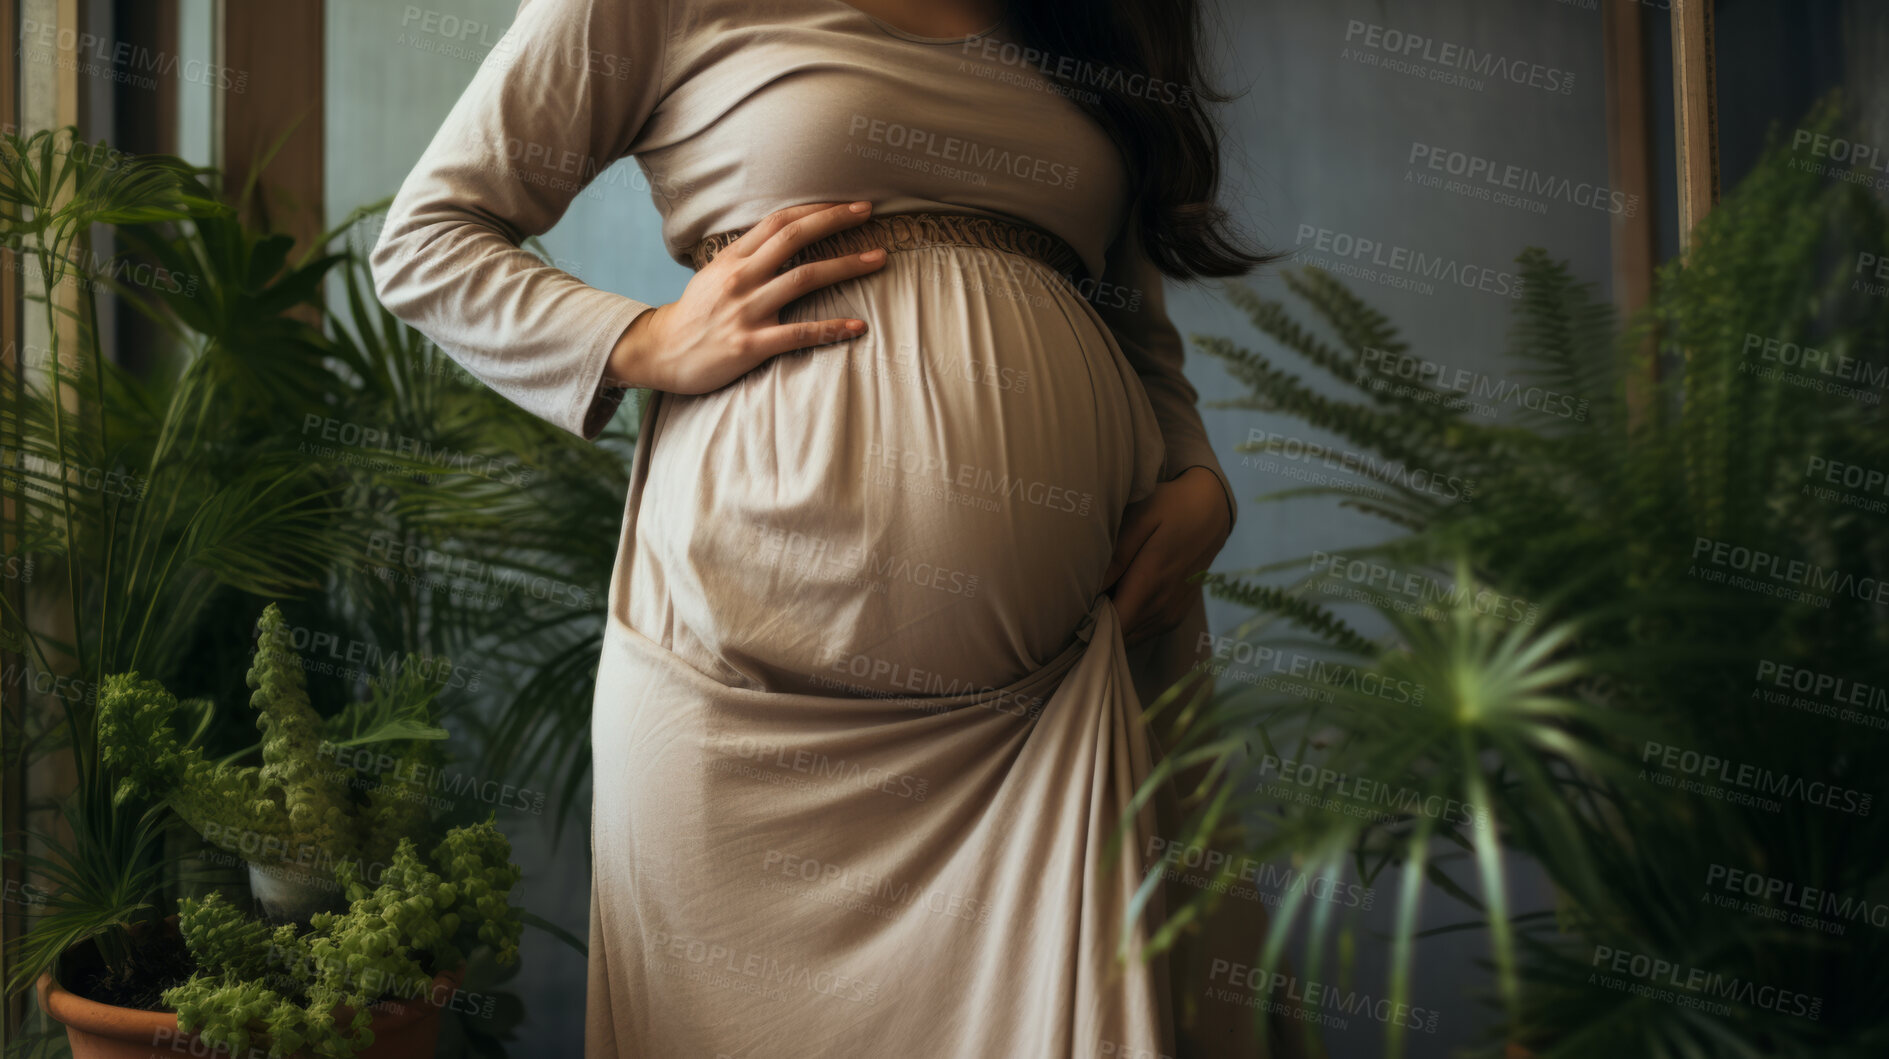 Buy stock photo Pregnant, woman and mother touching or caressing her belly while relaxing at home. Expecting, mom to be and cropped of a female rubbing her stomach and preparing for motherhood and childbirth